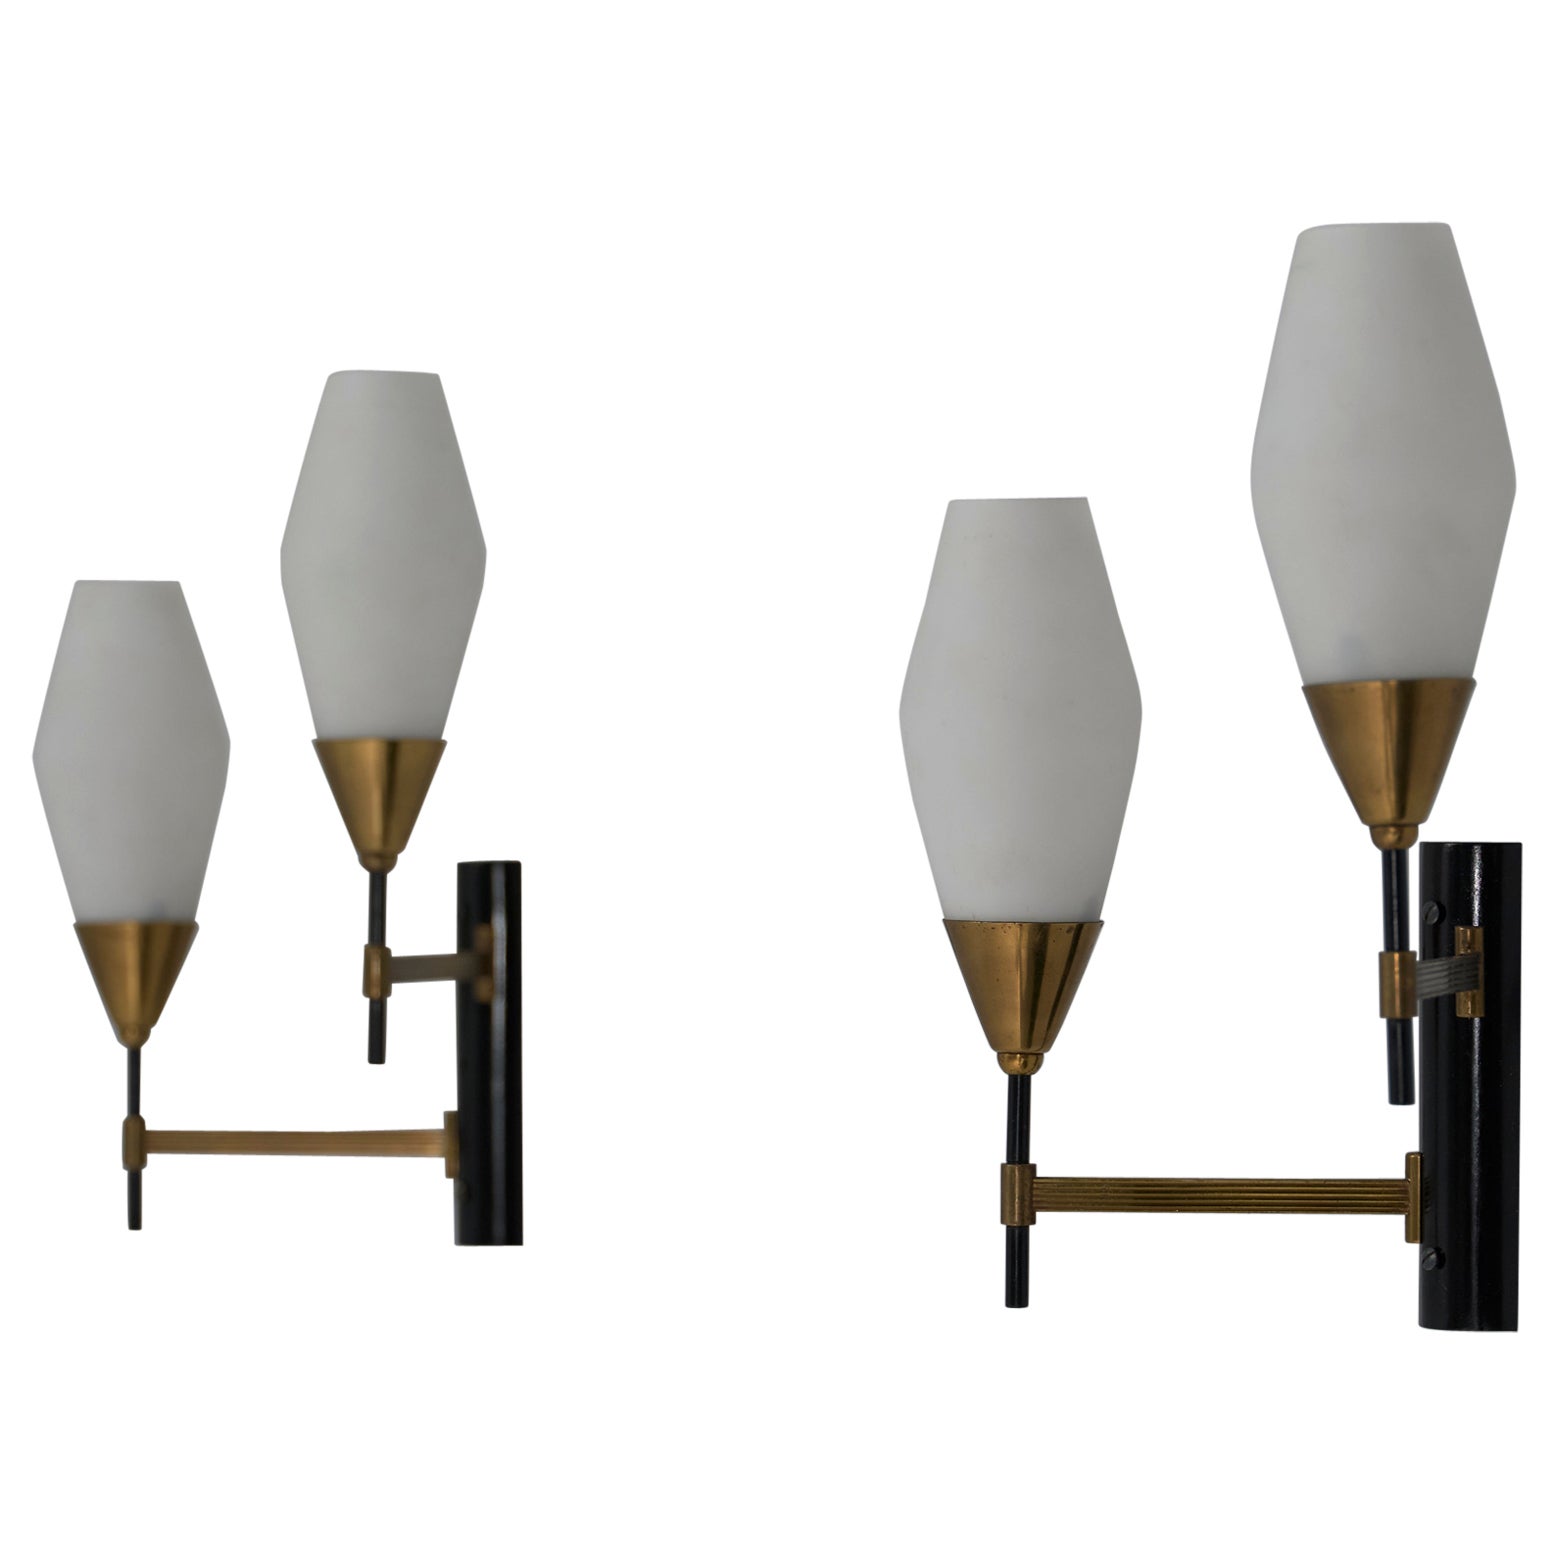 Pair of Italian Design Wall Lamps, Attributed to Stilnovo, 1950s